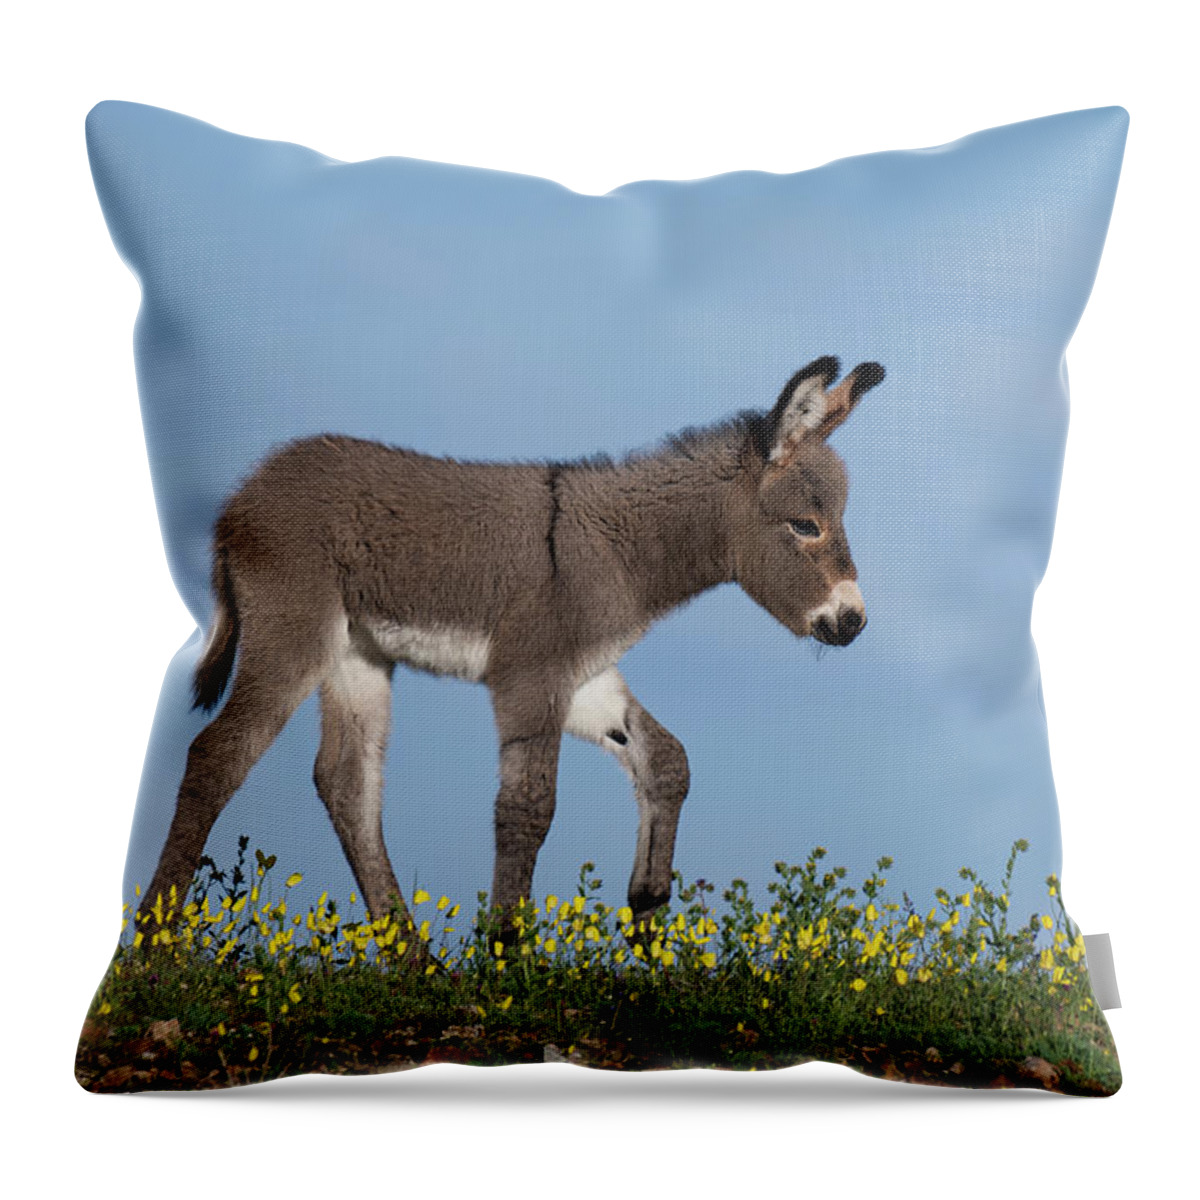 Wild Burros Throw Pillow featuring the photograph Spring Time by Mary Hone